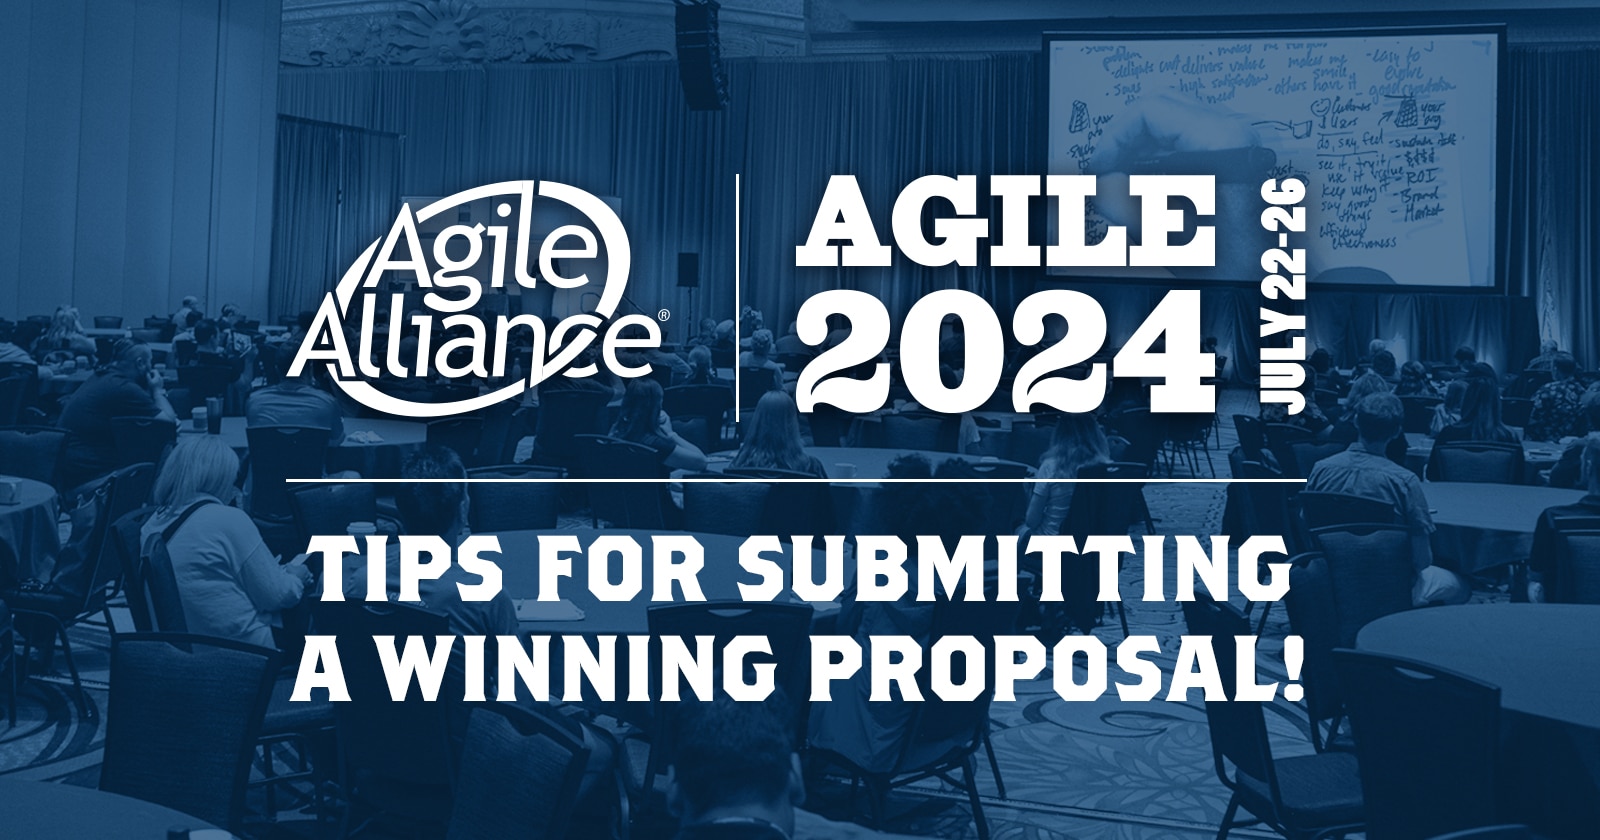 Agile2024 Submission Tips